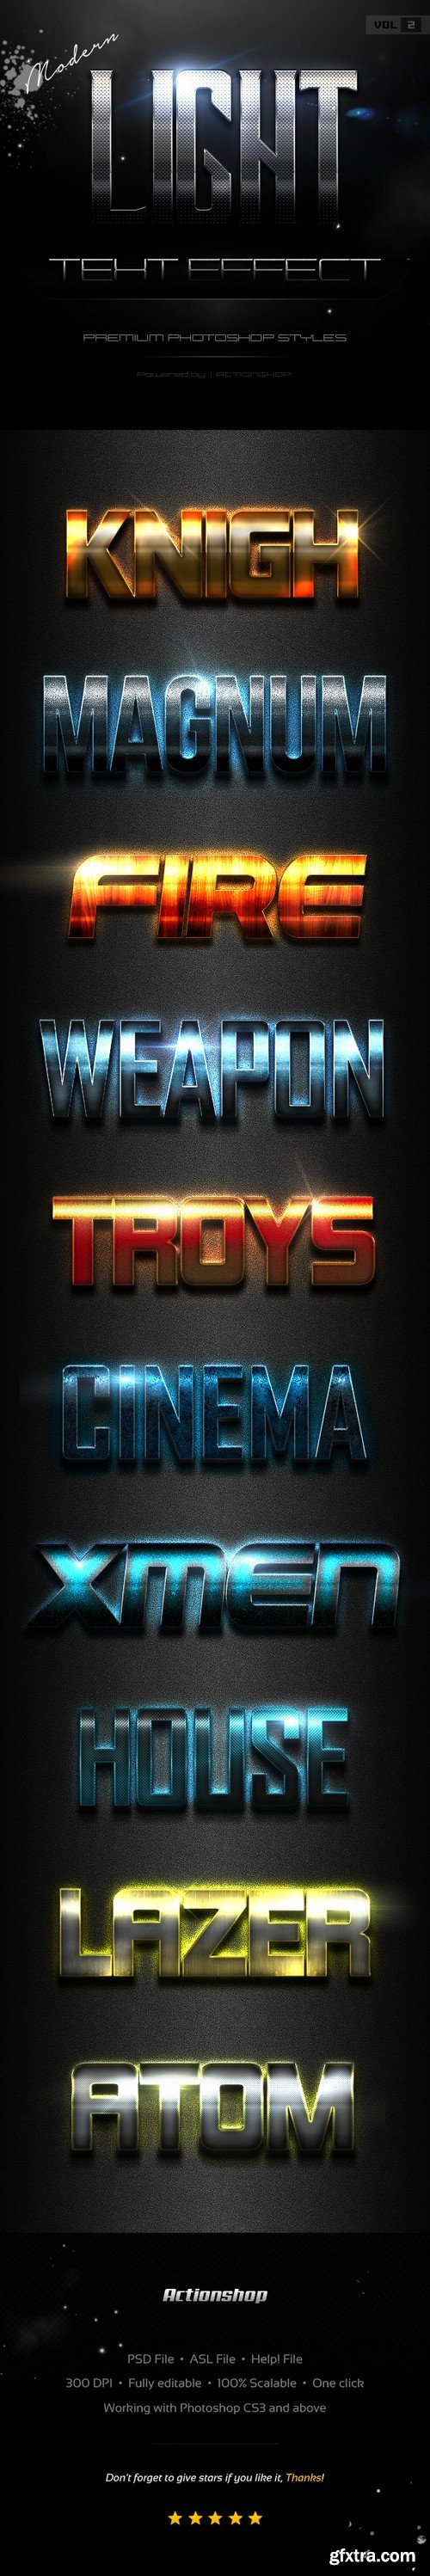 Graphicriver - 10 Modern Light Text Effects Vol.2 19634638